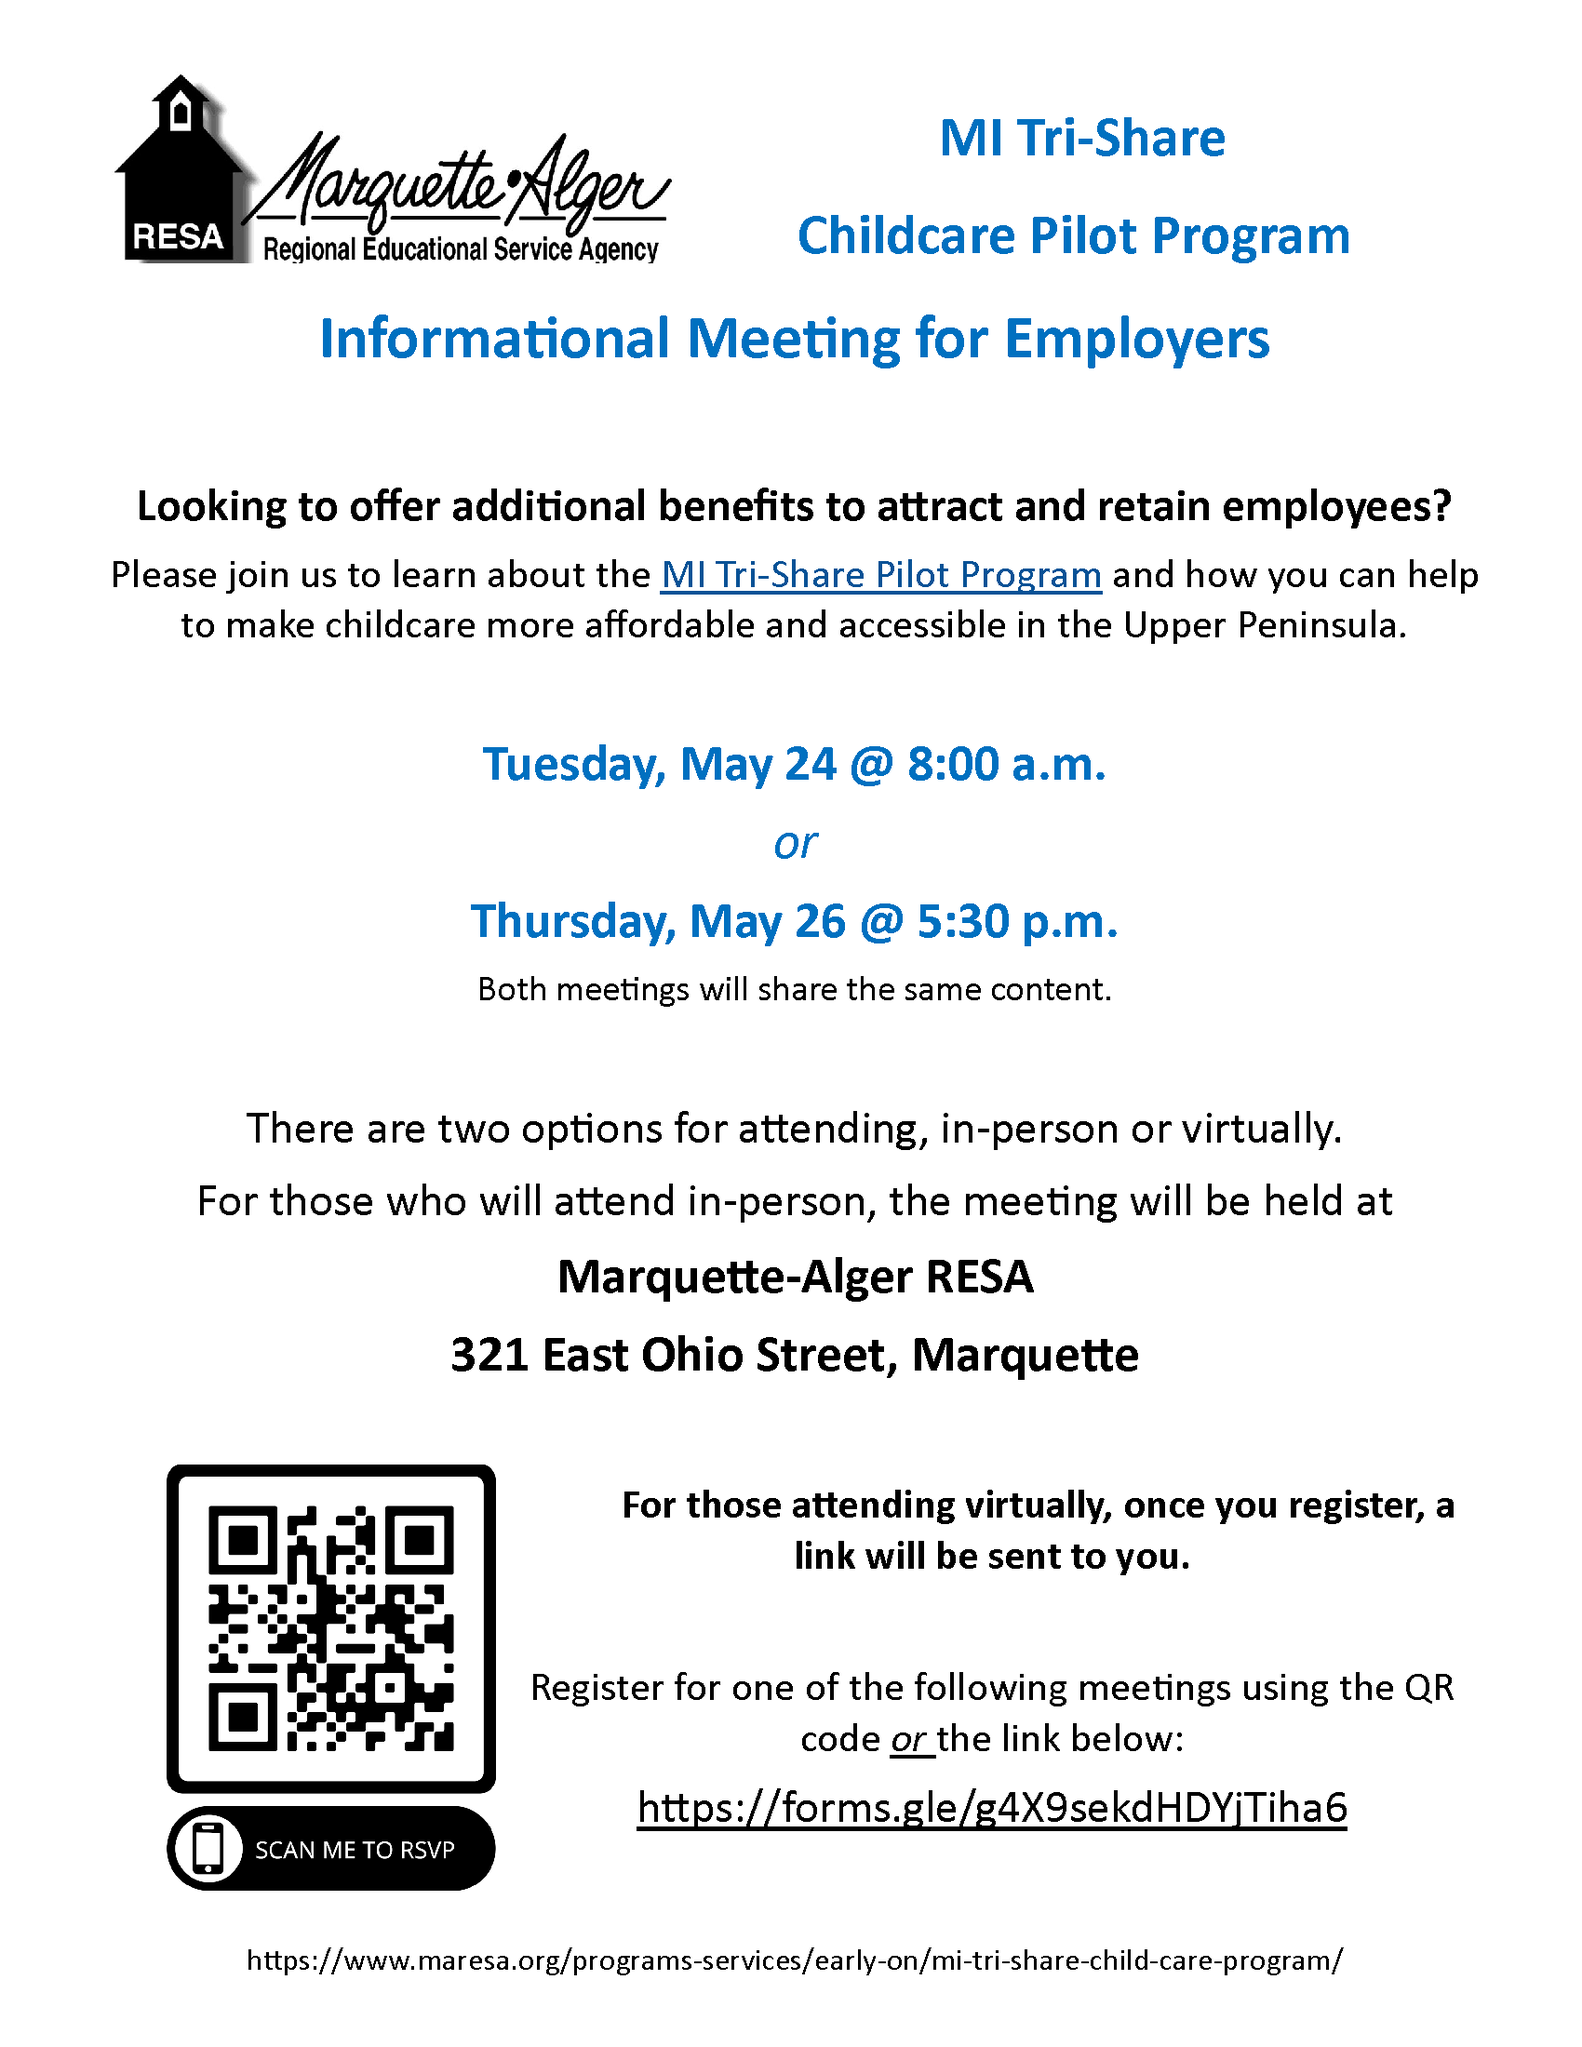 Flyer with information about upcoming TriShare Informational meetings